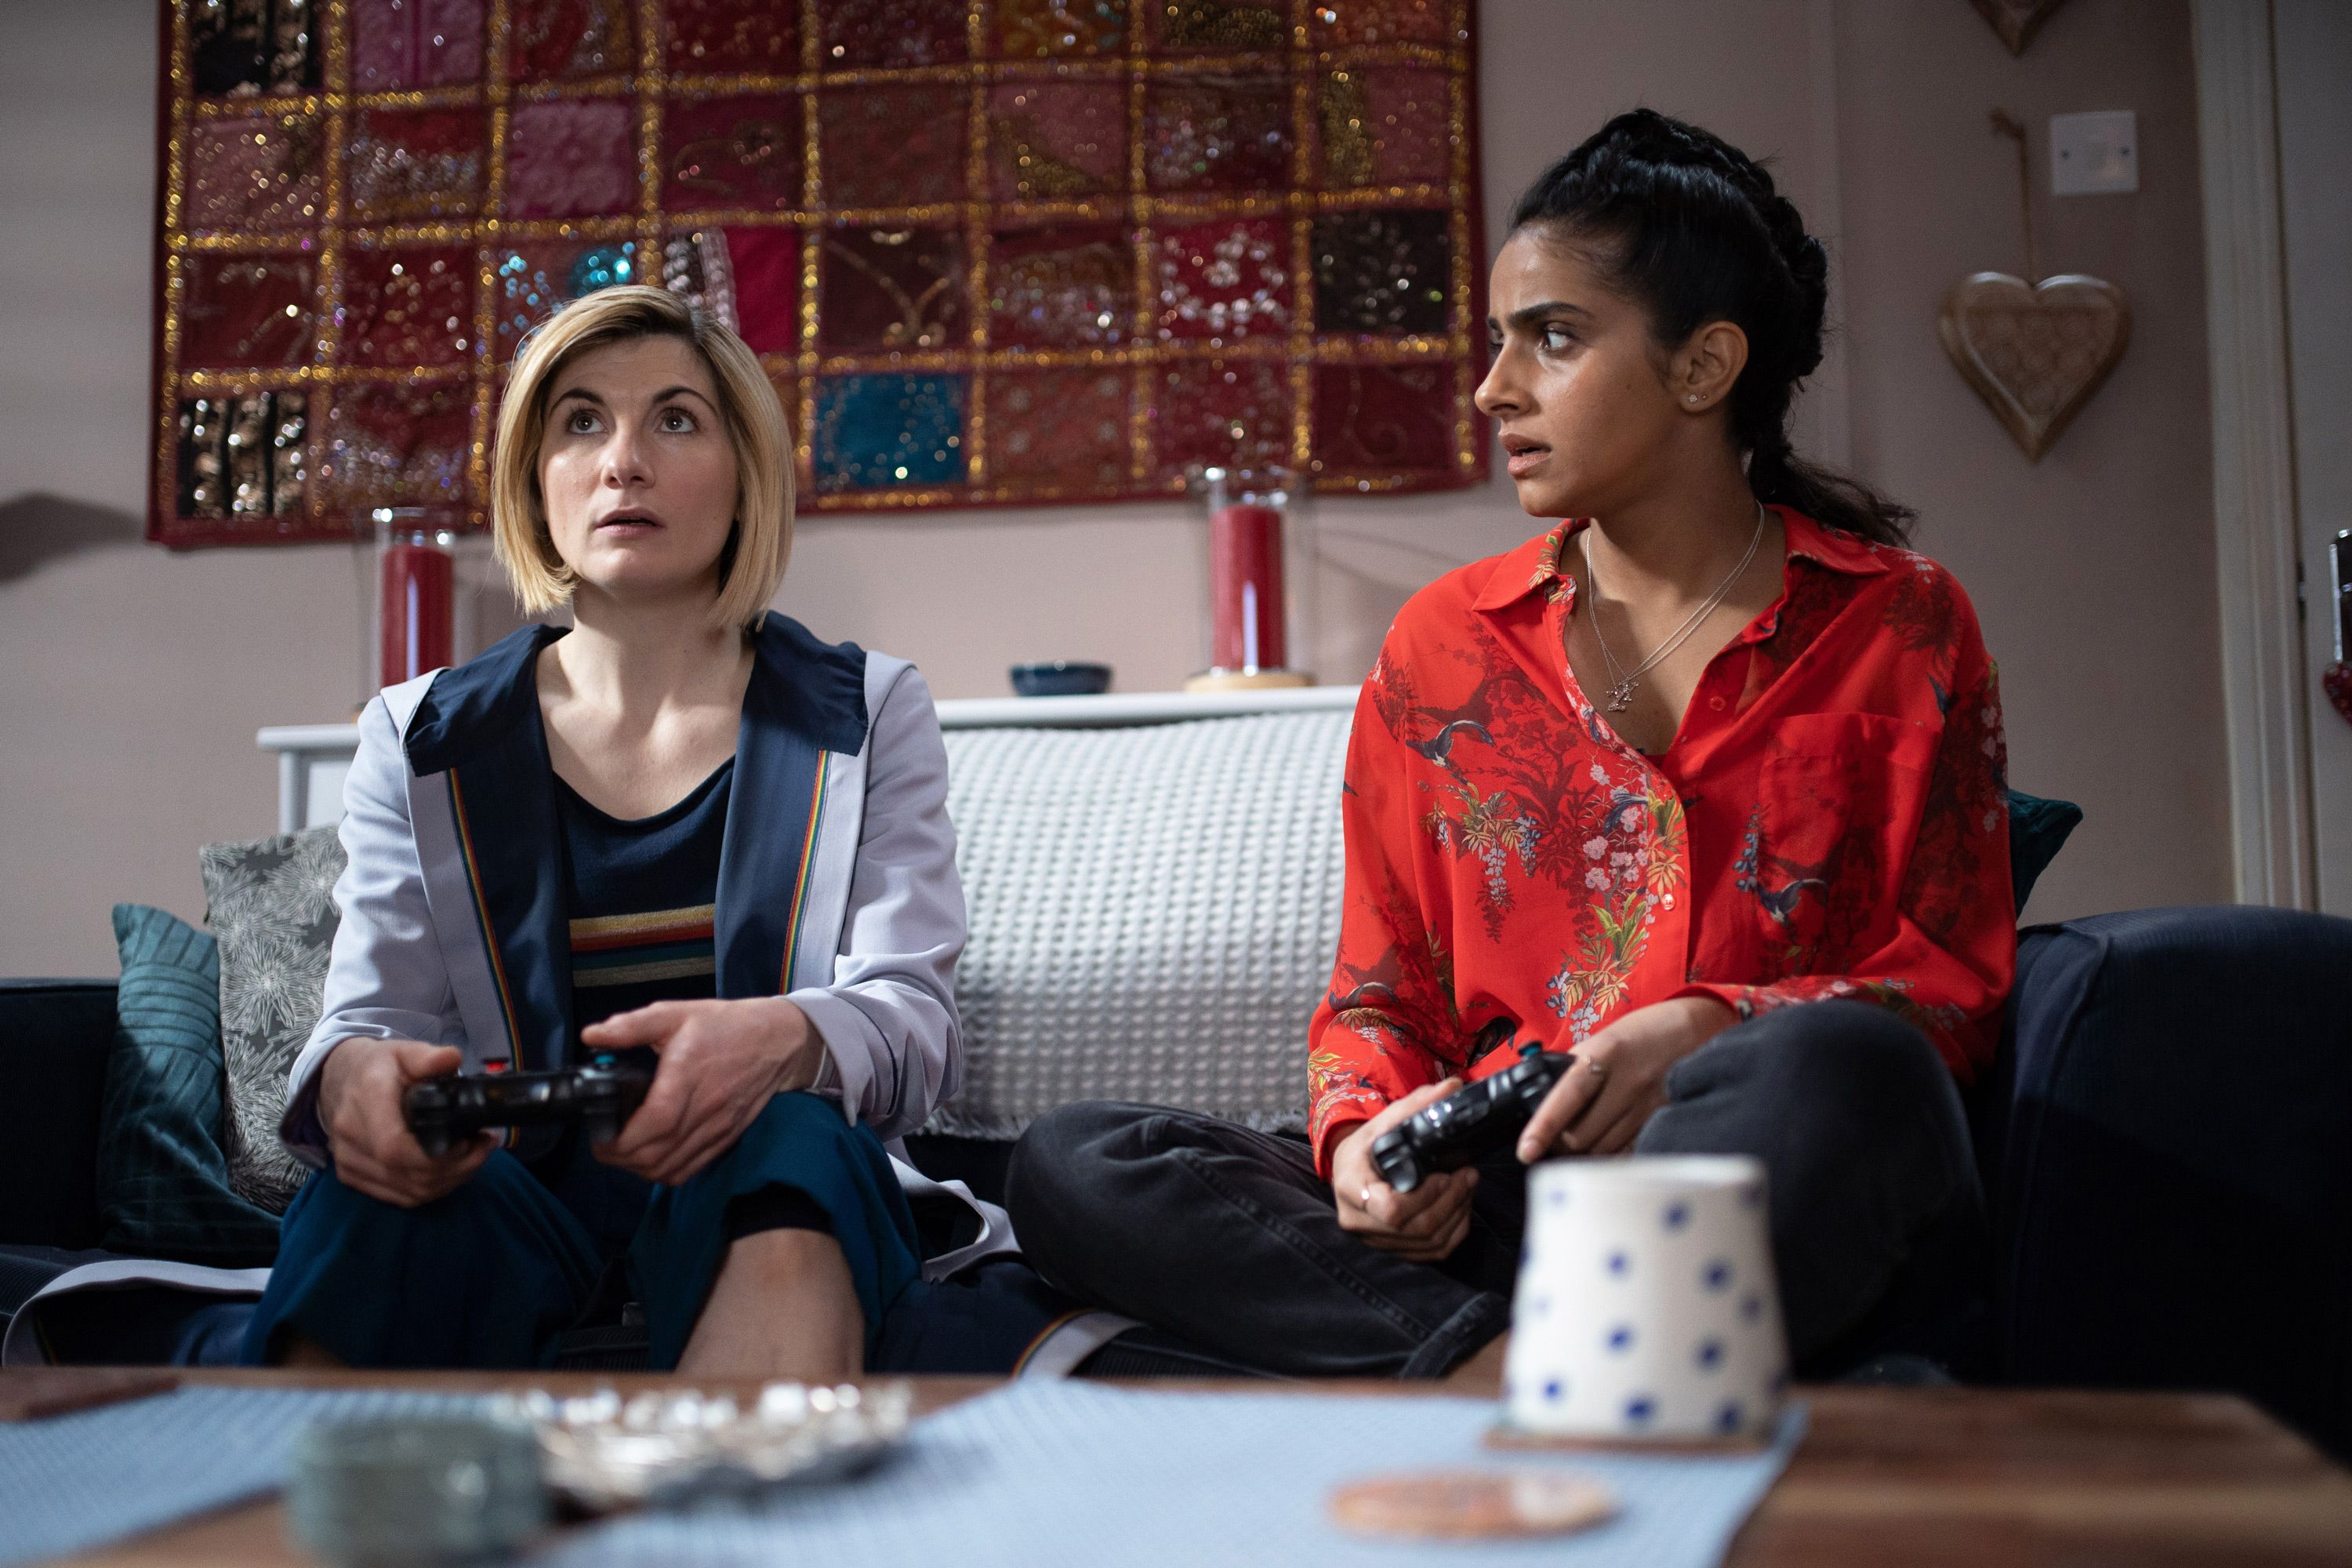 Doctor Who season 13 episode 1 cast: Who is in the Flux premiere